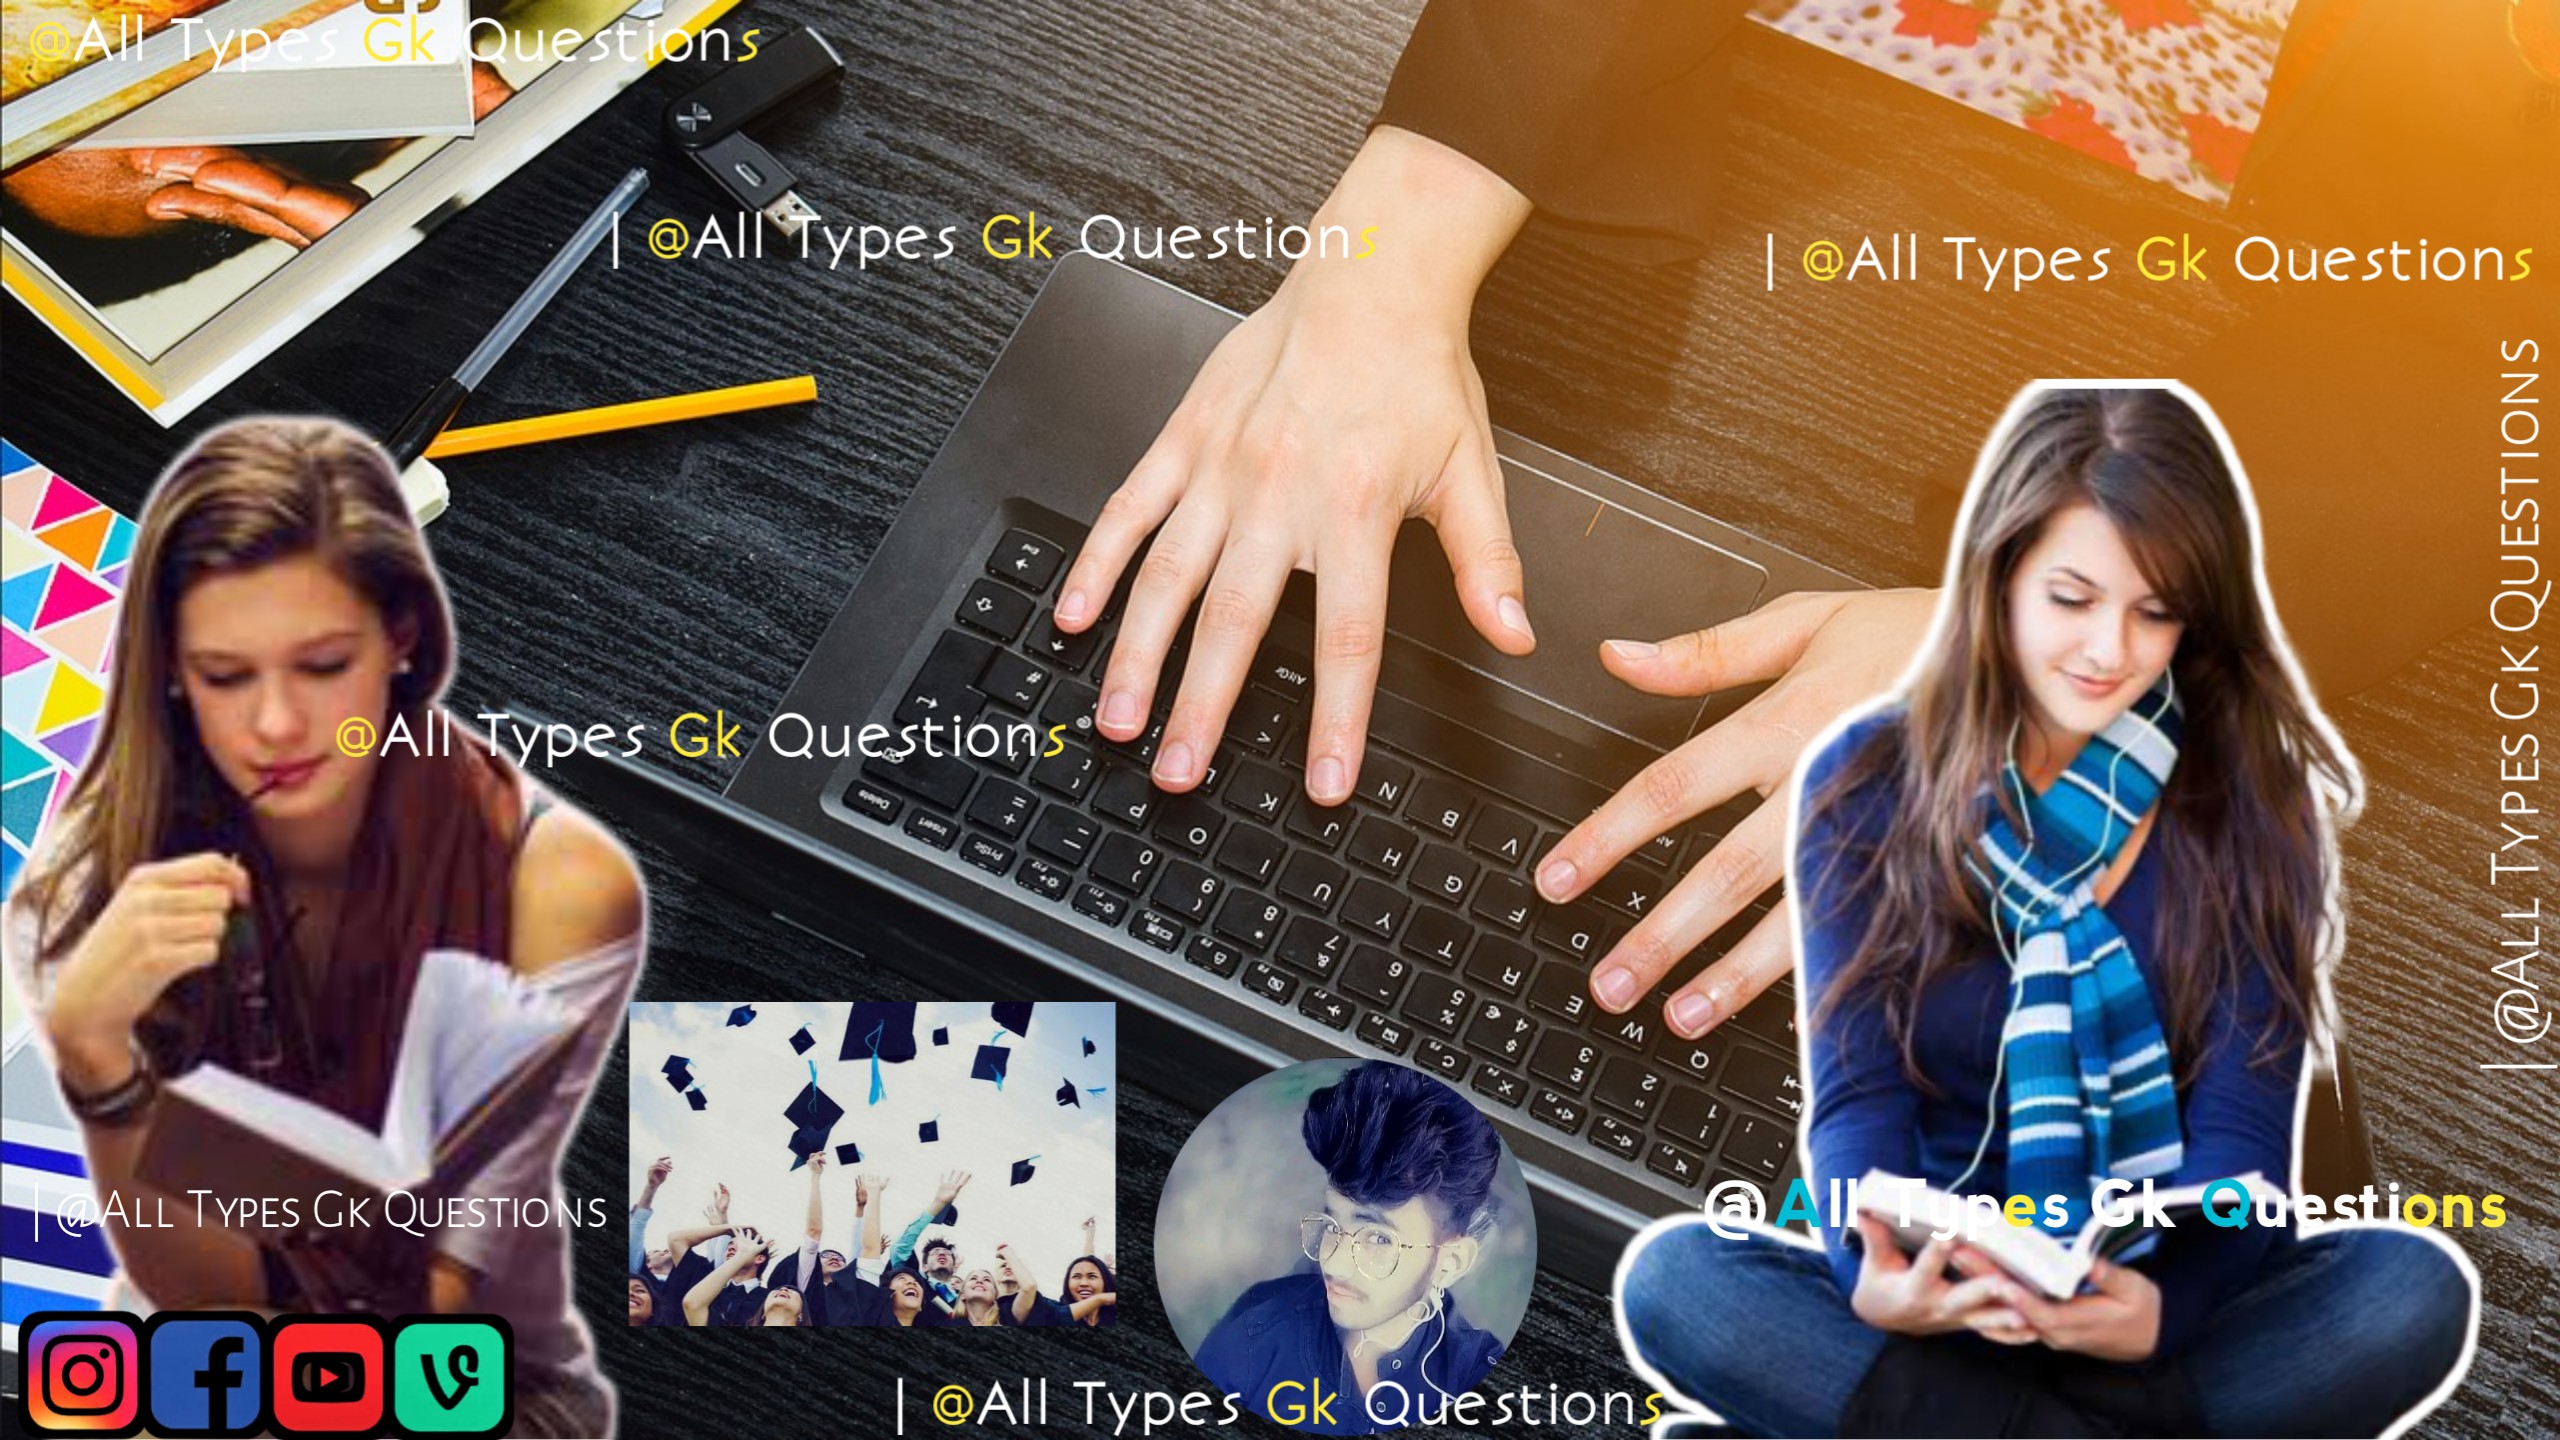 All Types Gk Questions • Sharechat Photos And Videos 4102